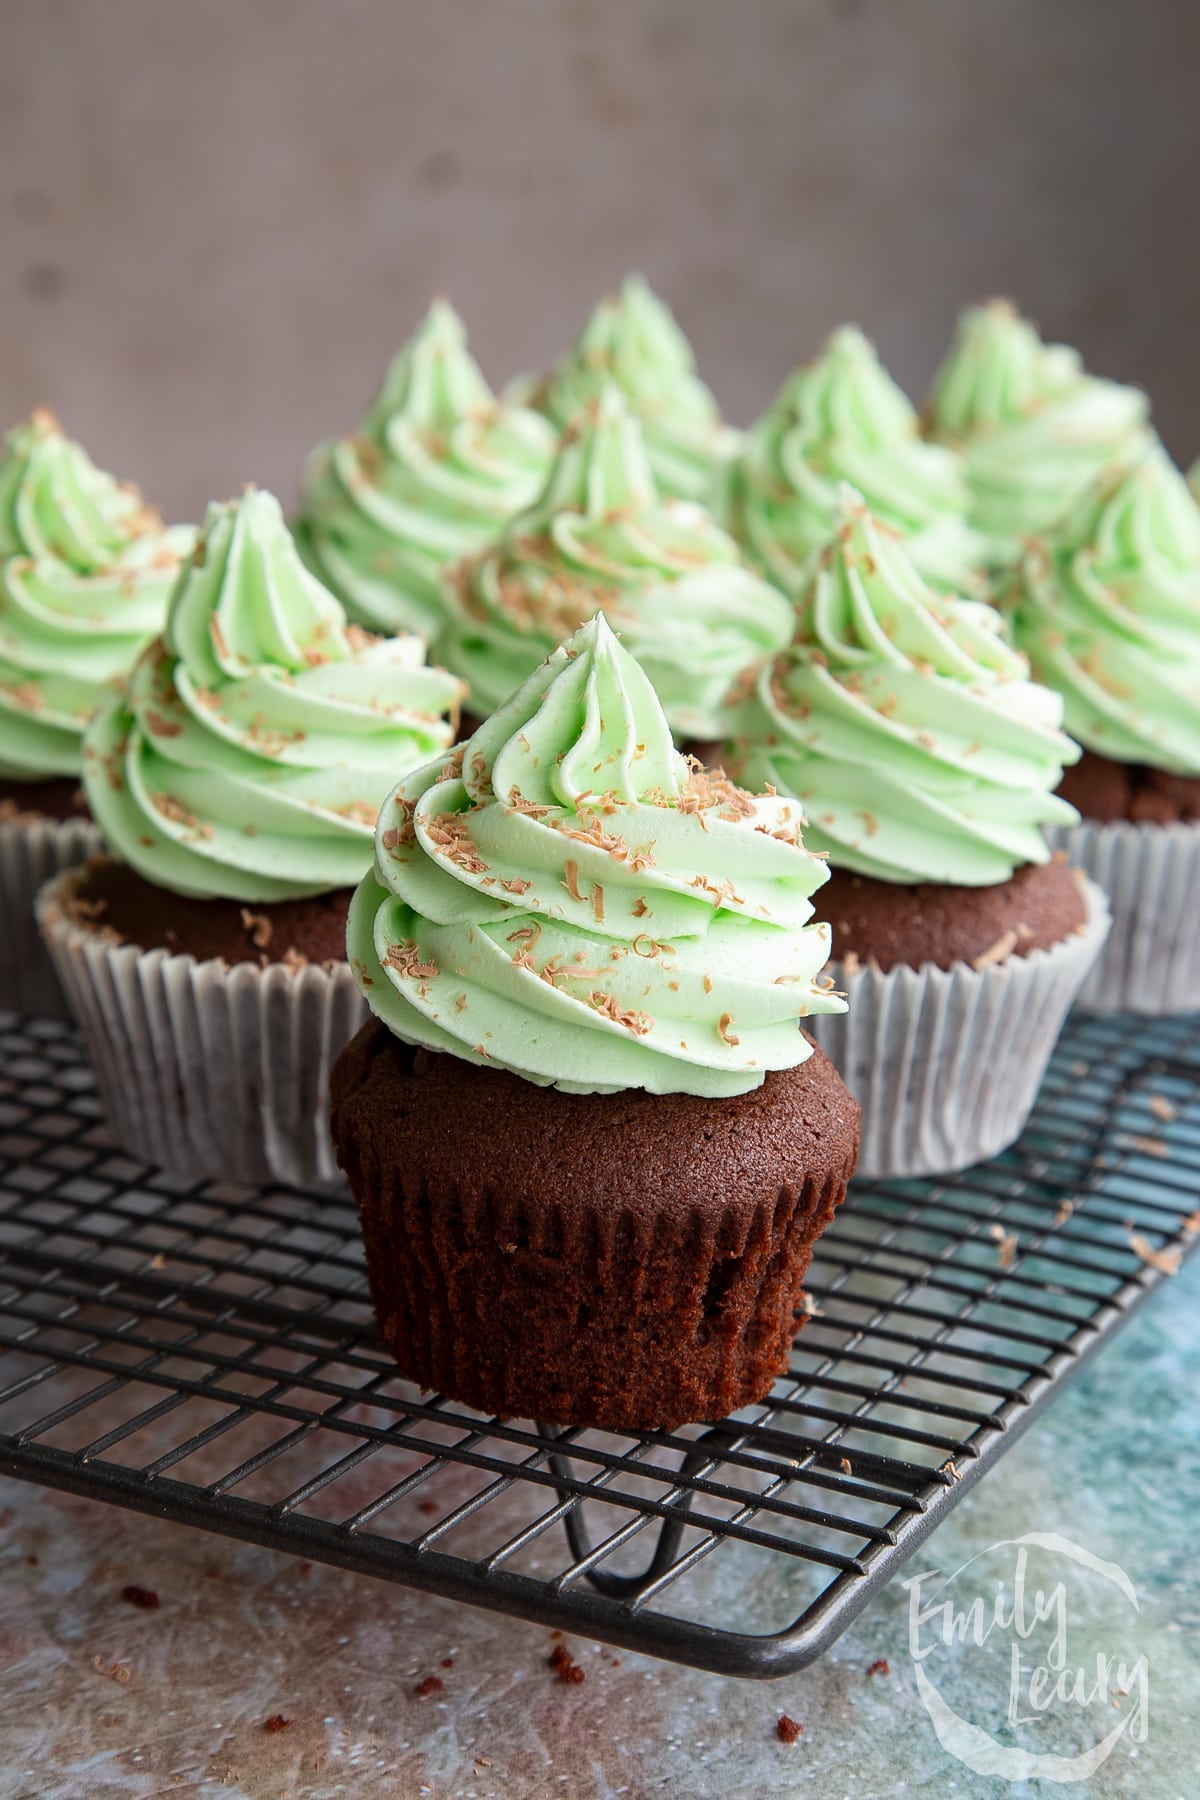 A batch of mint choc chip cupcakes cooling on a rack.